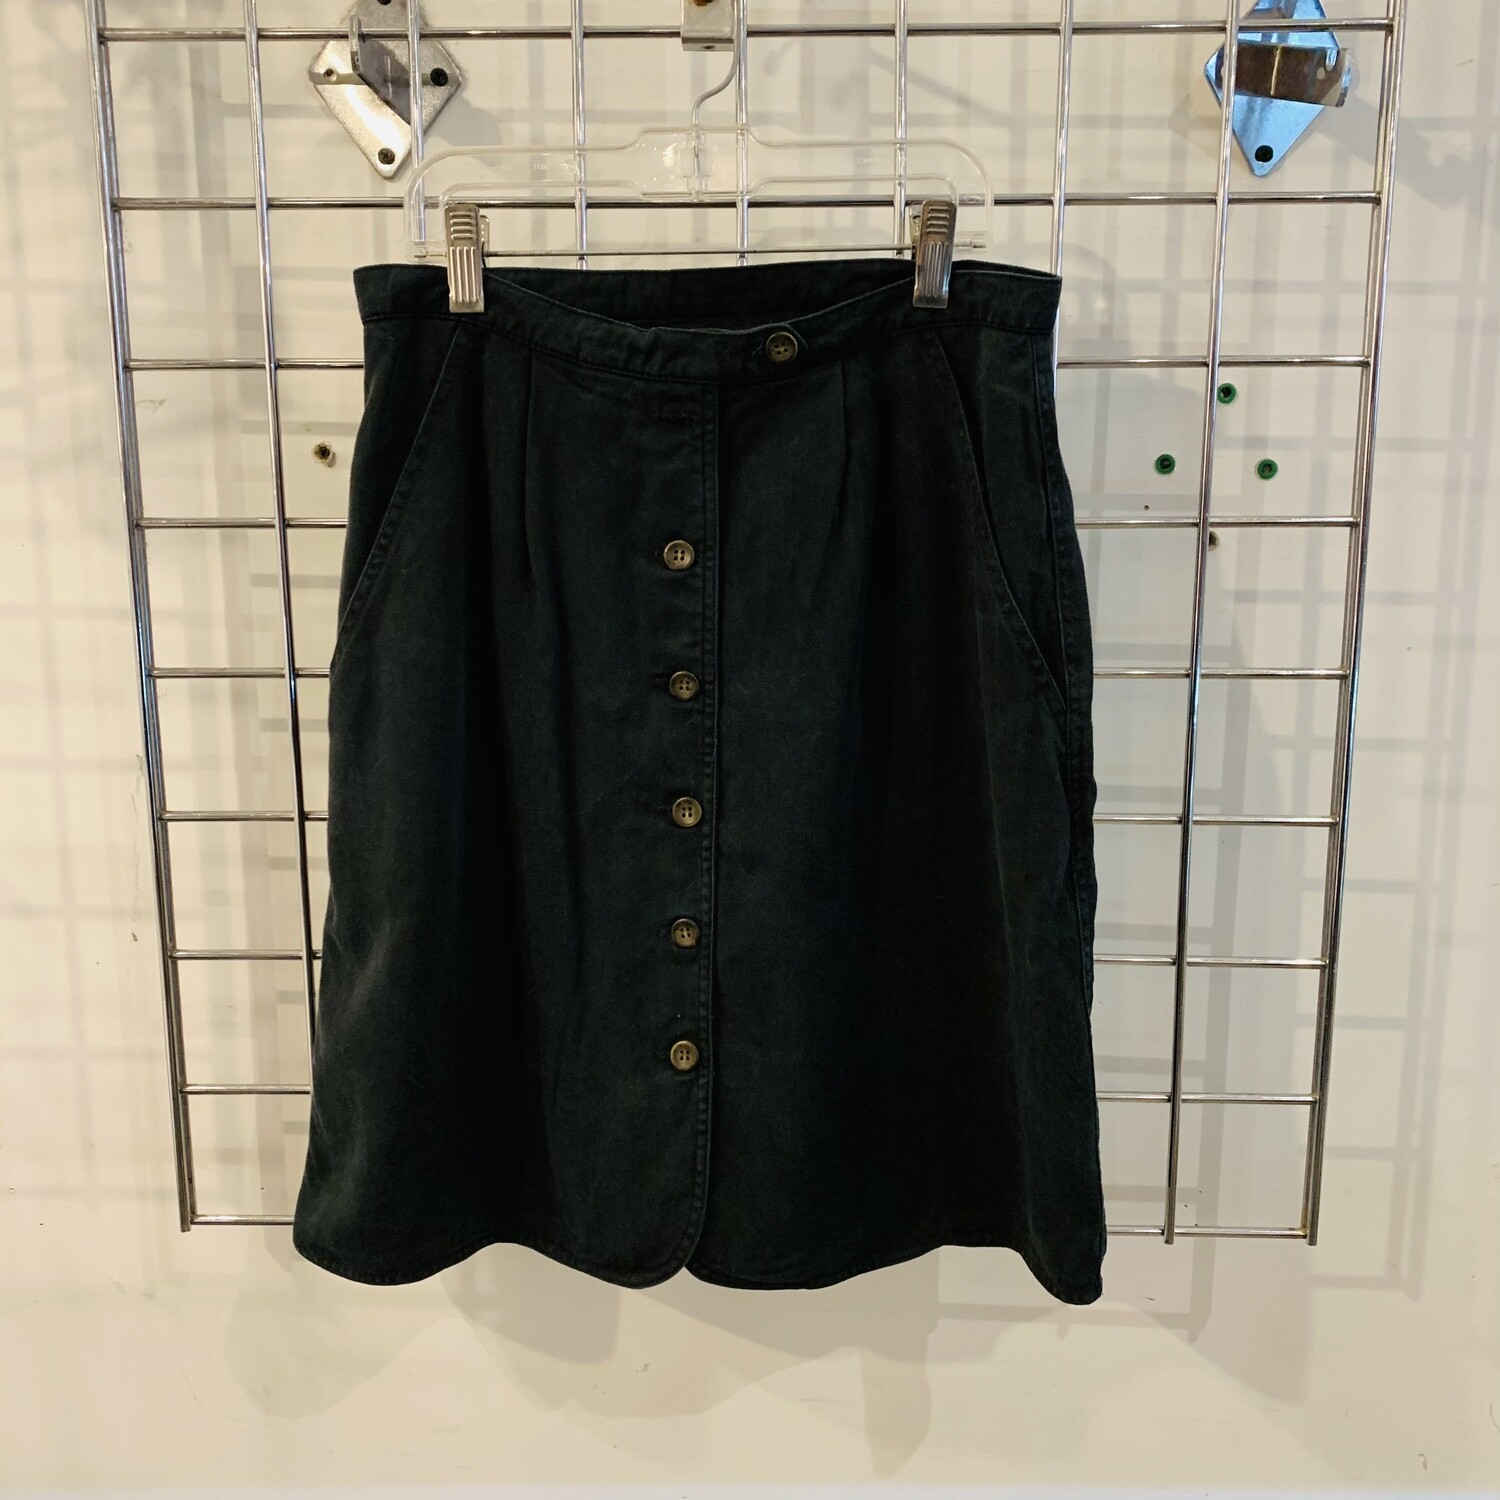 Size 6 Central Falls Button Skirt